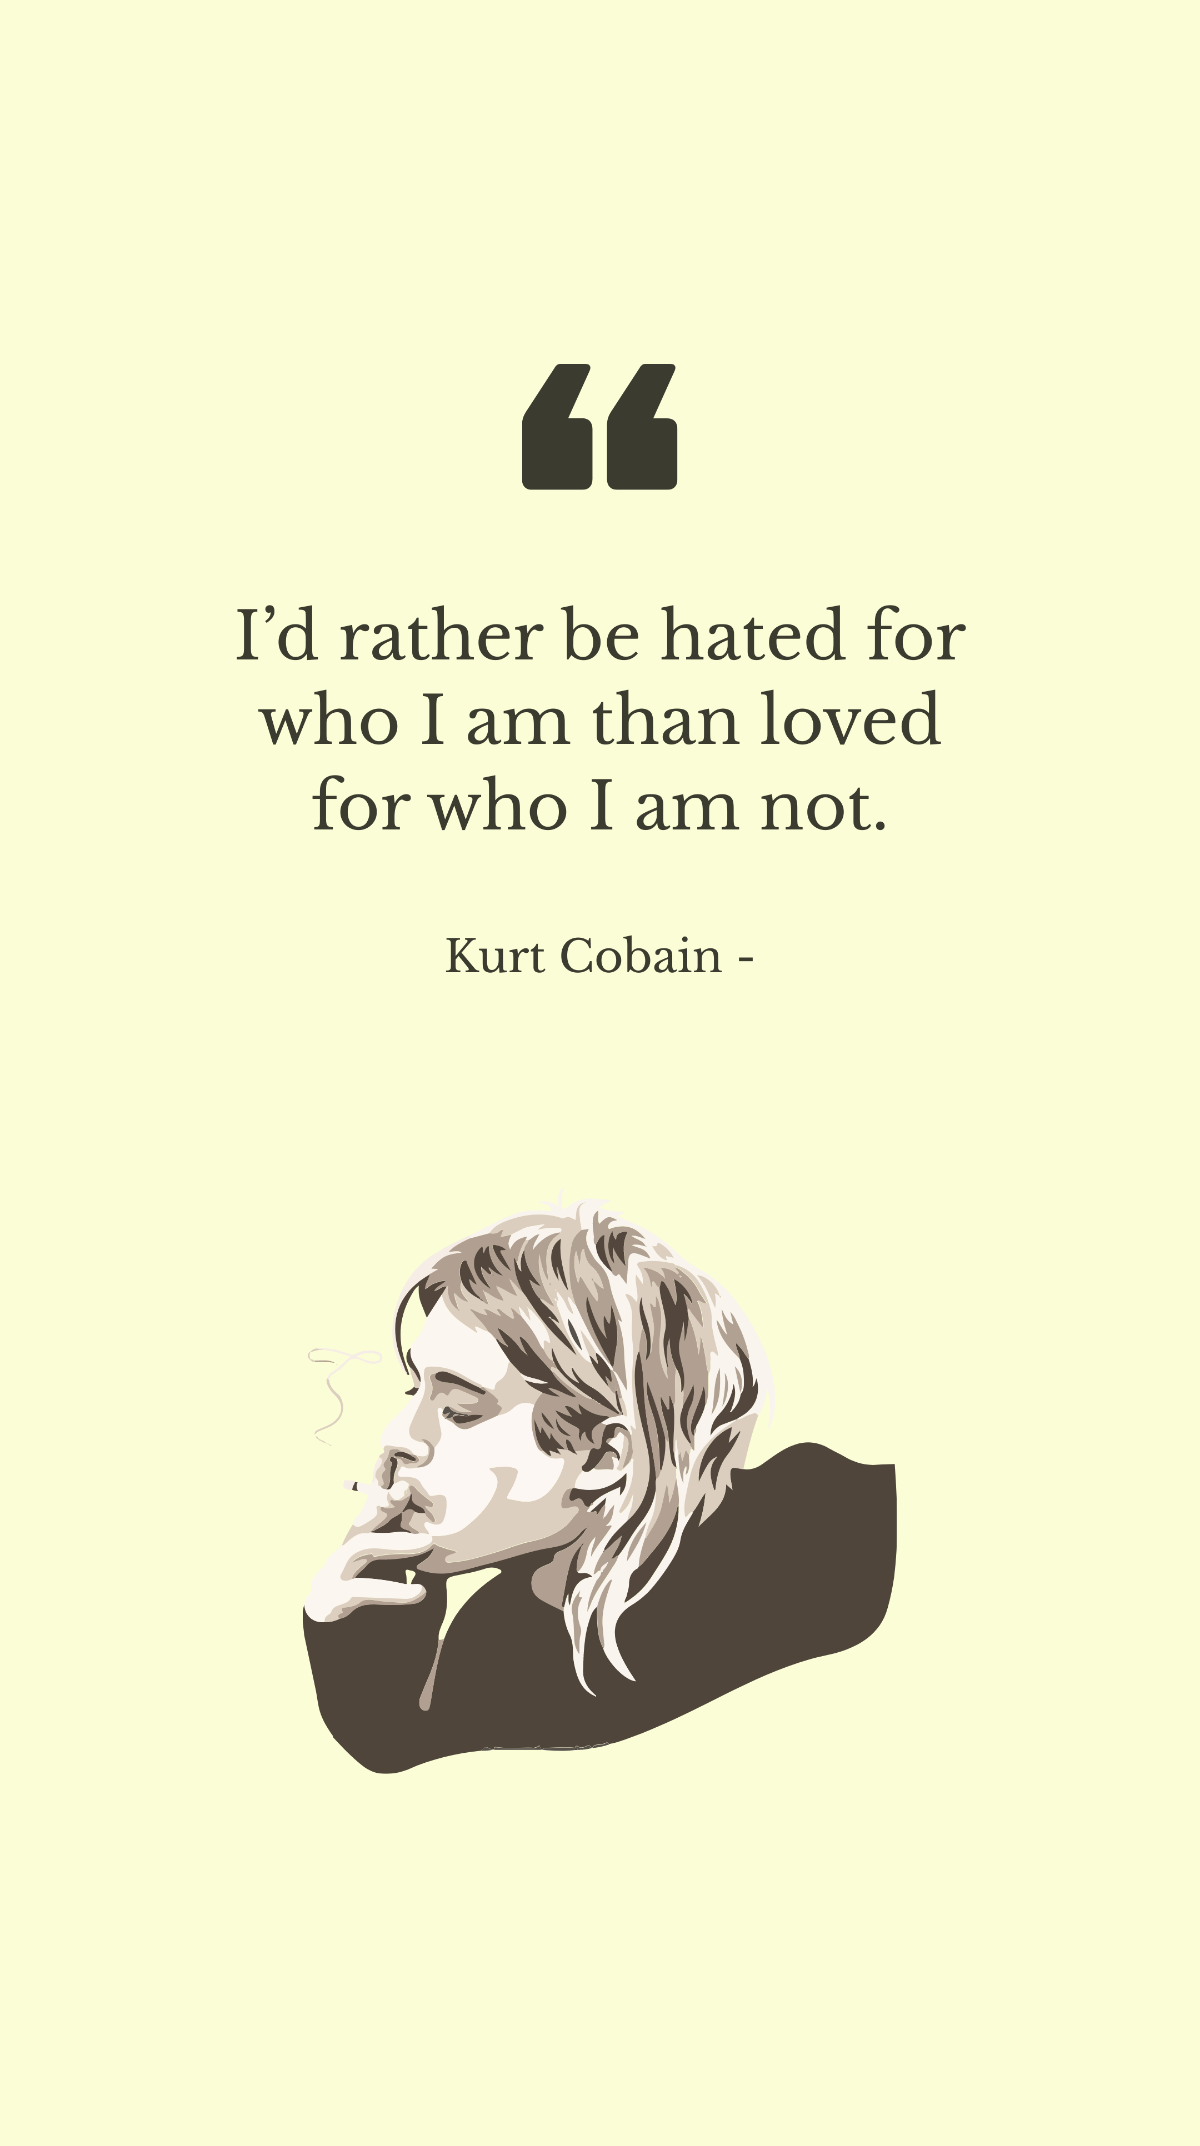 Free Kurt Cobain - I’d rather be hated for who I am than loved for who I am not. Template